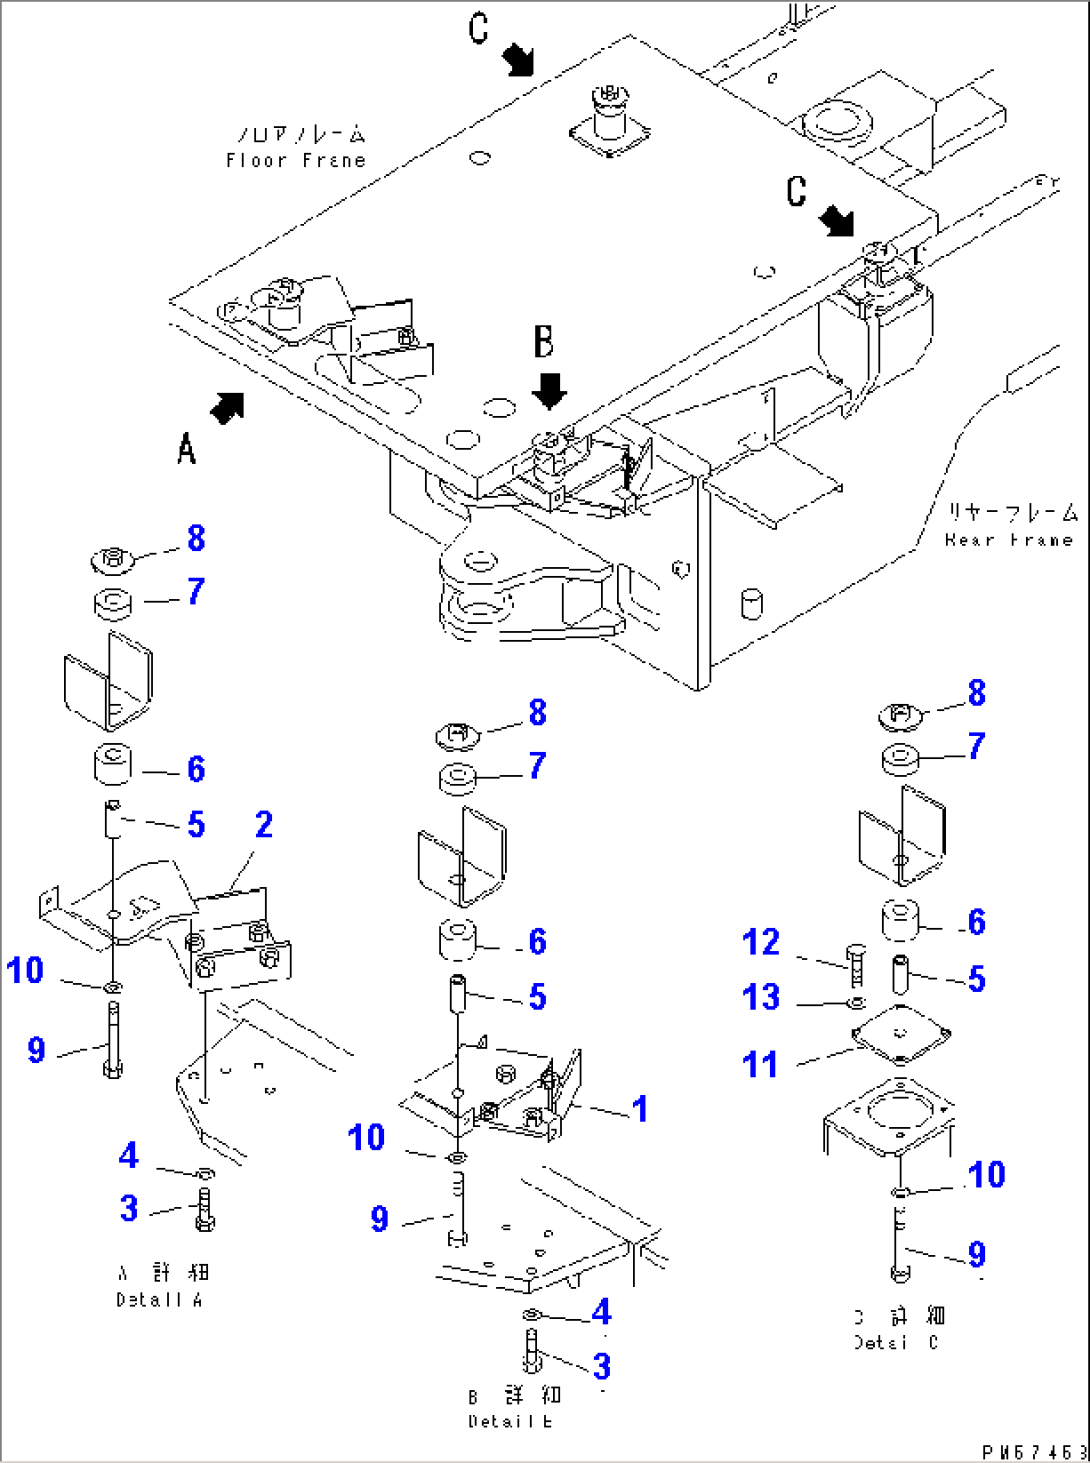 FLOOR FRAME MOUNTING PARTS